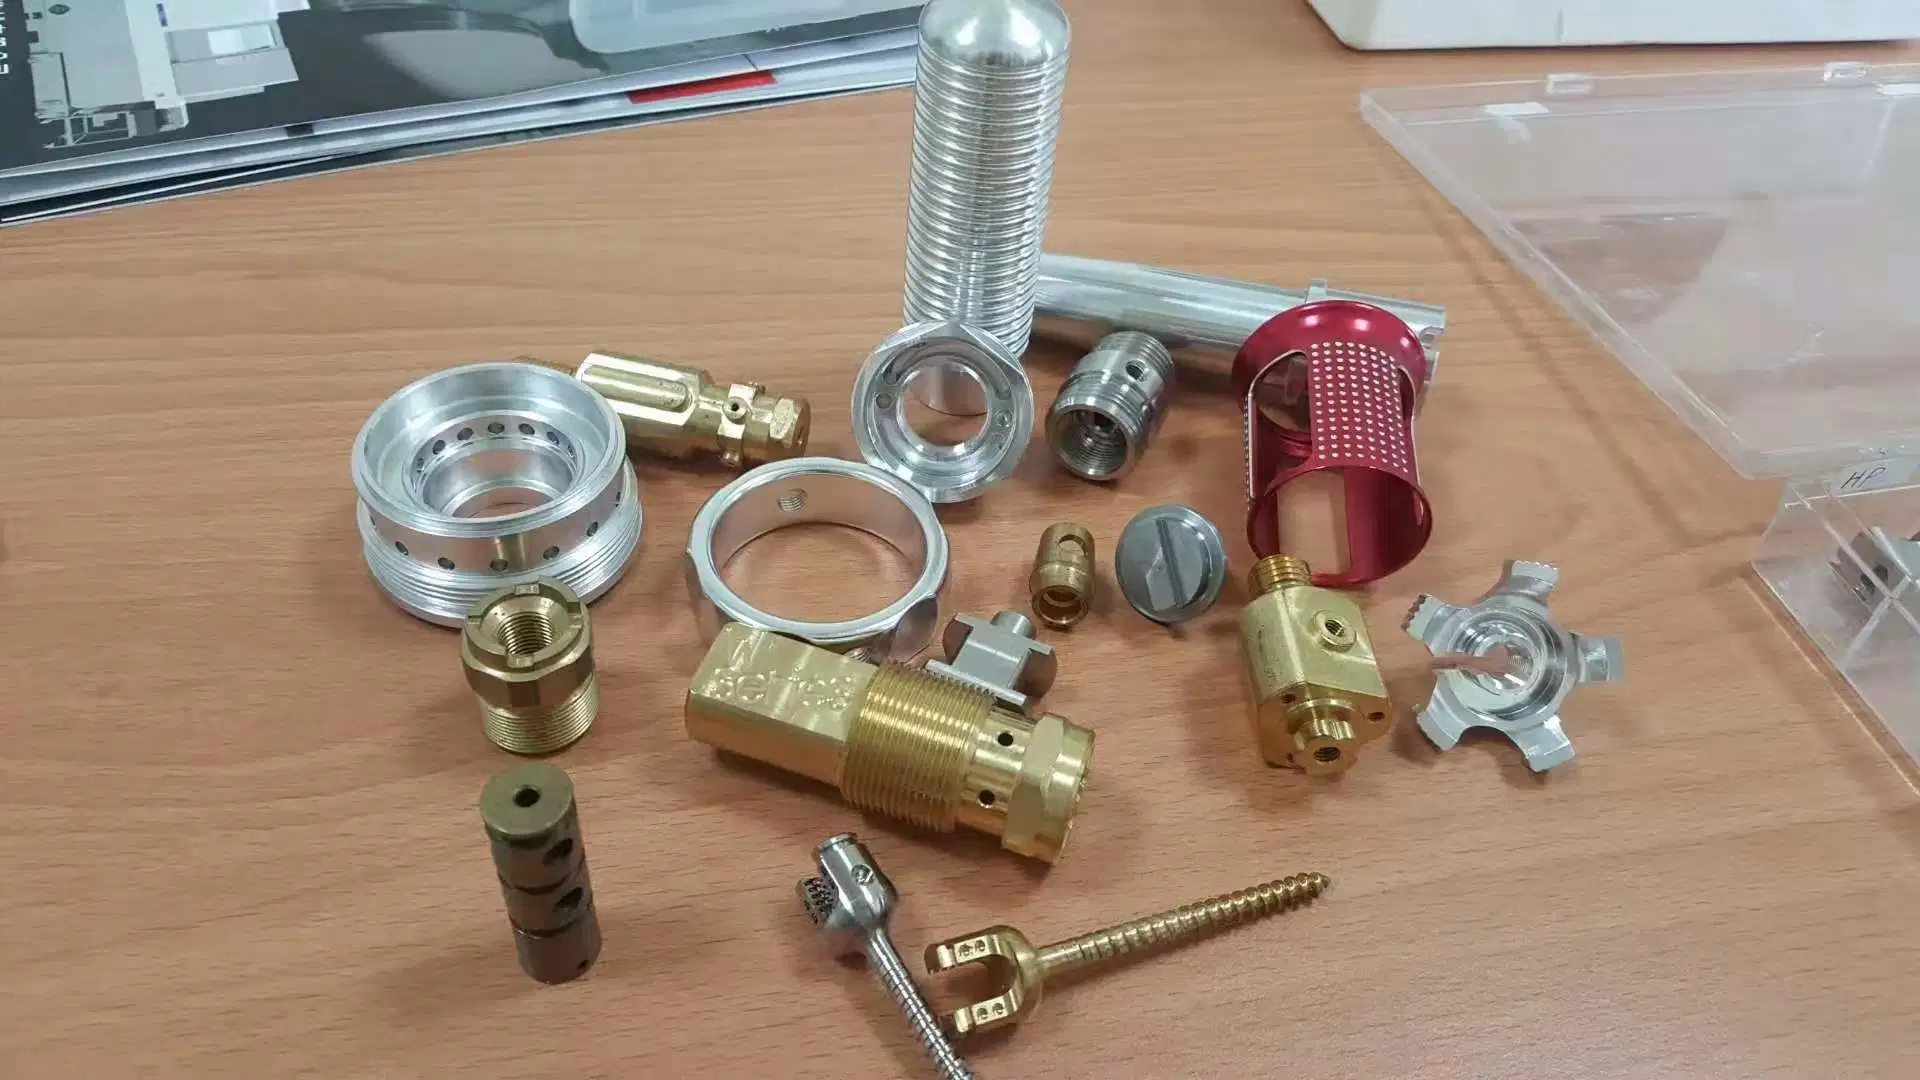 OEM Aluminum/Brass/Copper/Stainless Steel/Iron/Titanium Alloy/Plastic CNC Machining (Turning, Milling, Drilling, Tapping, Grinding) Sports Equipment Accessories